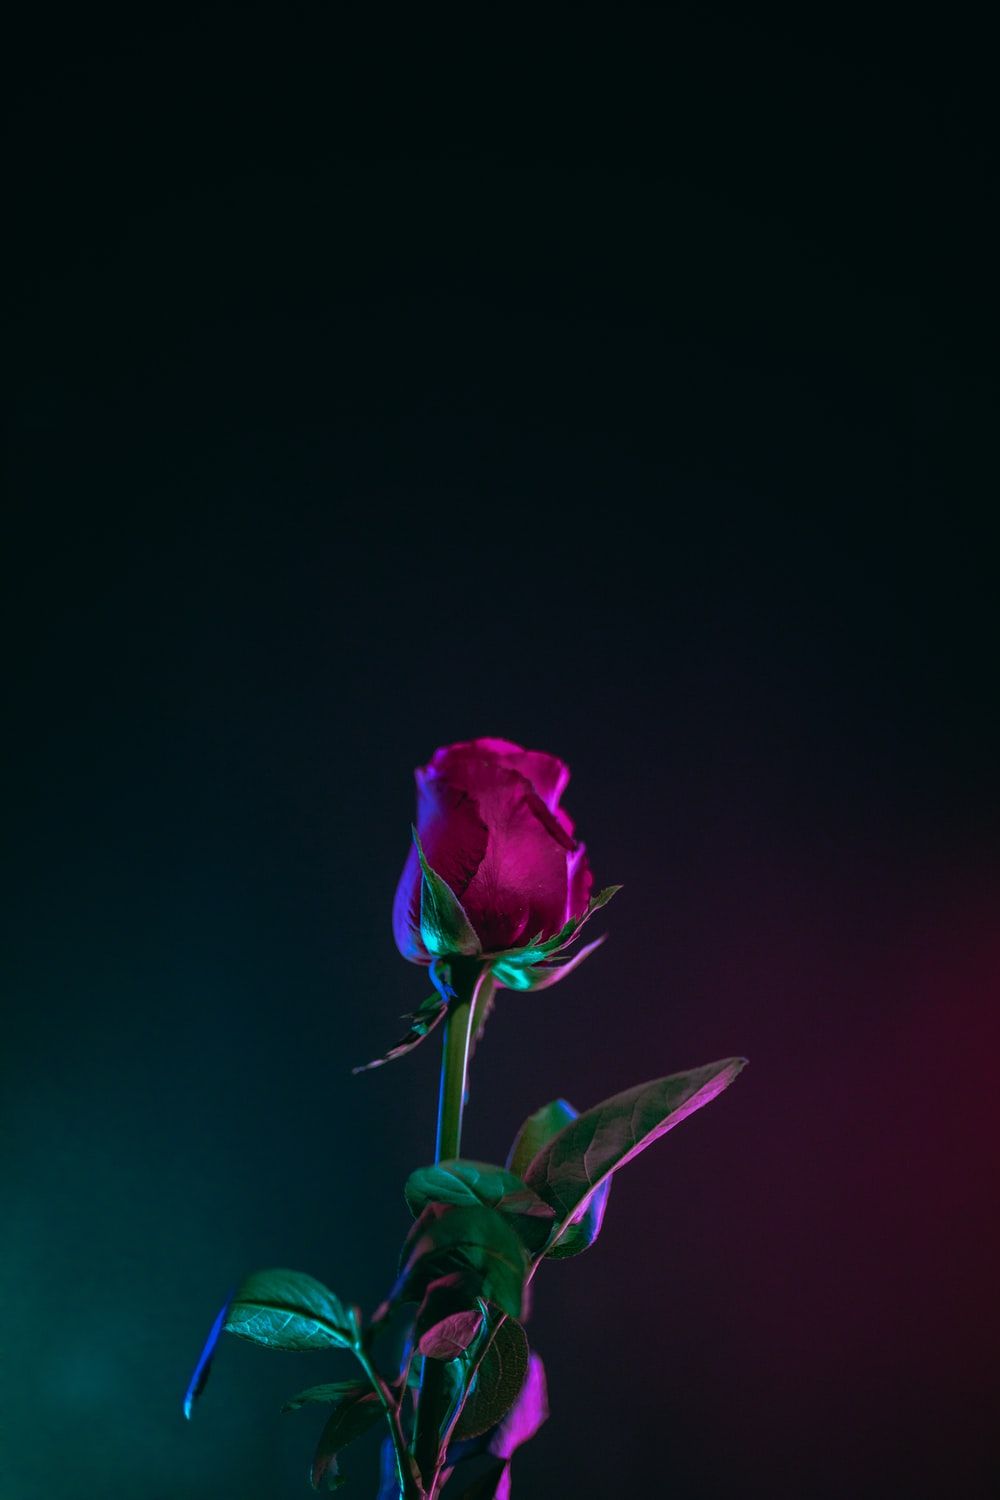 Neon Rose Picture. Download Free Image